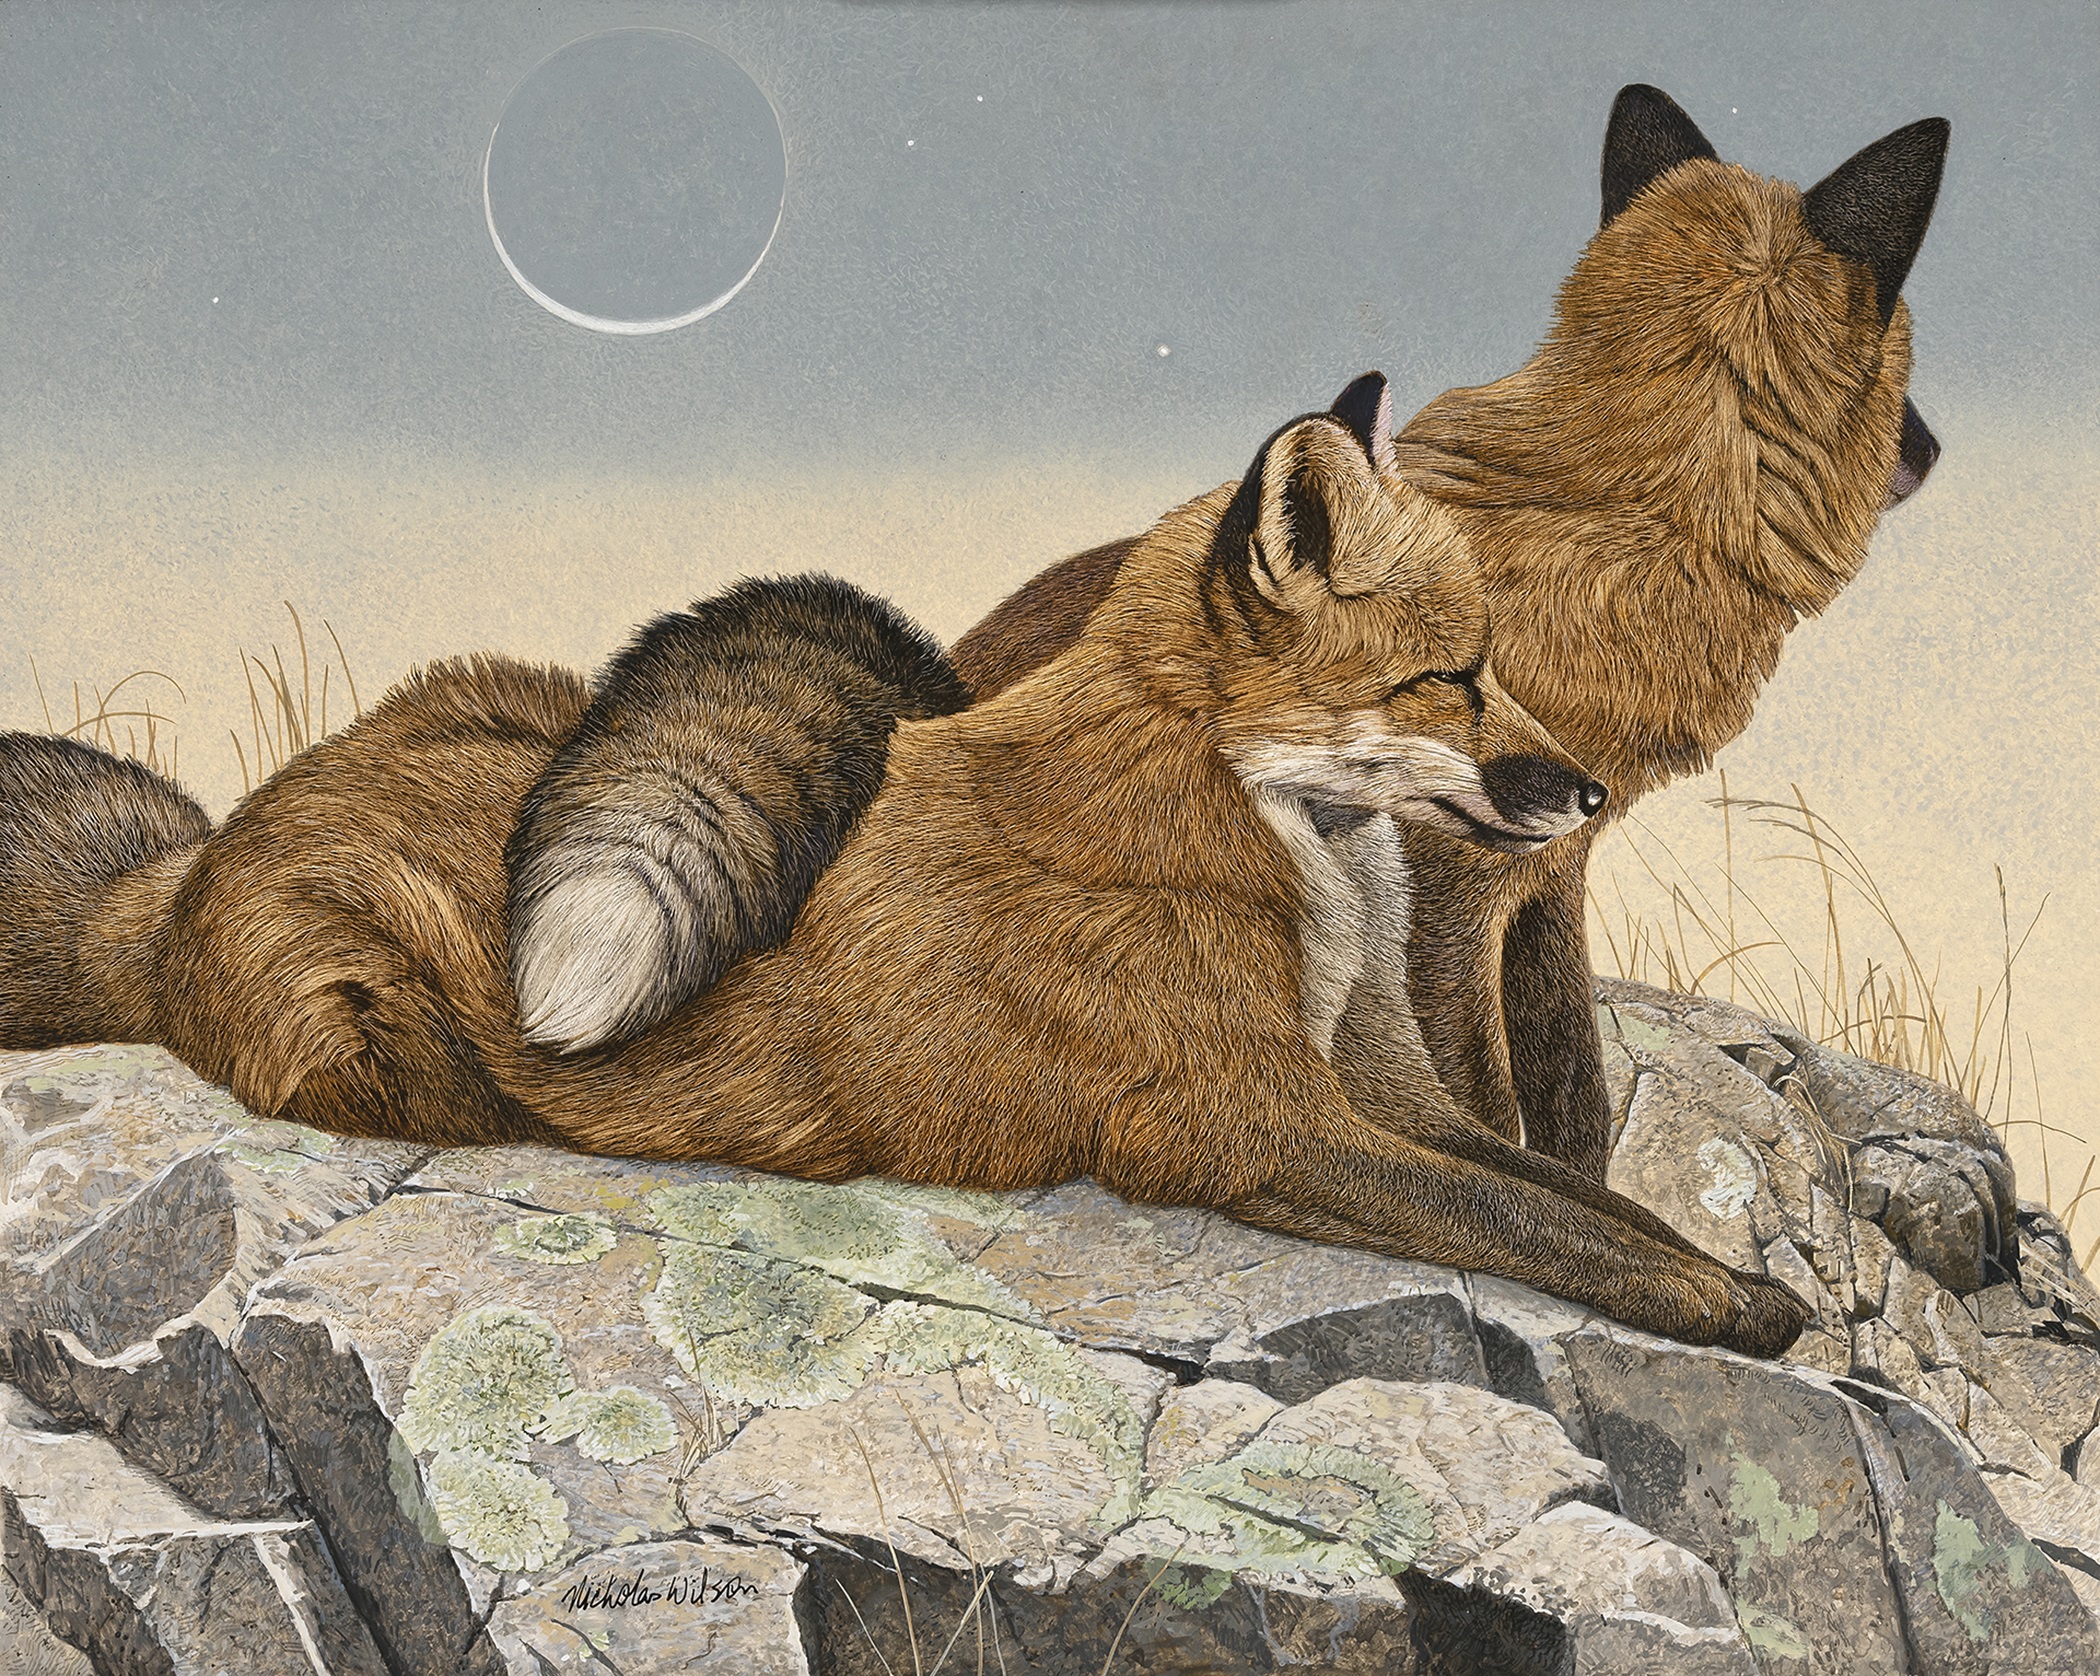 New Wildlife Art at the 34th Annual "Western Visions" Show Fine Art